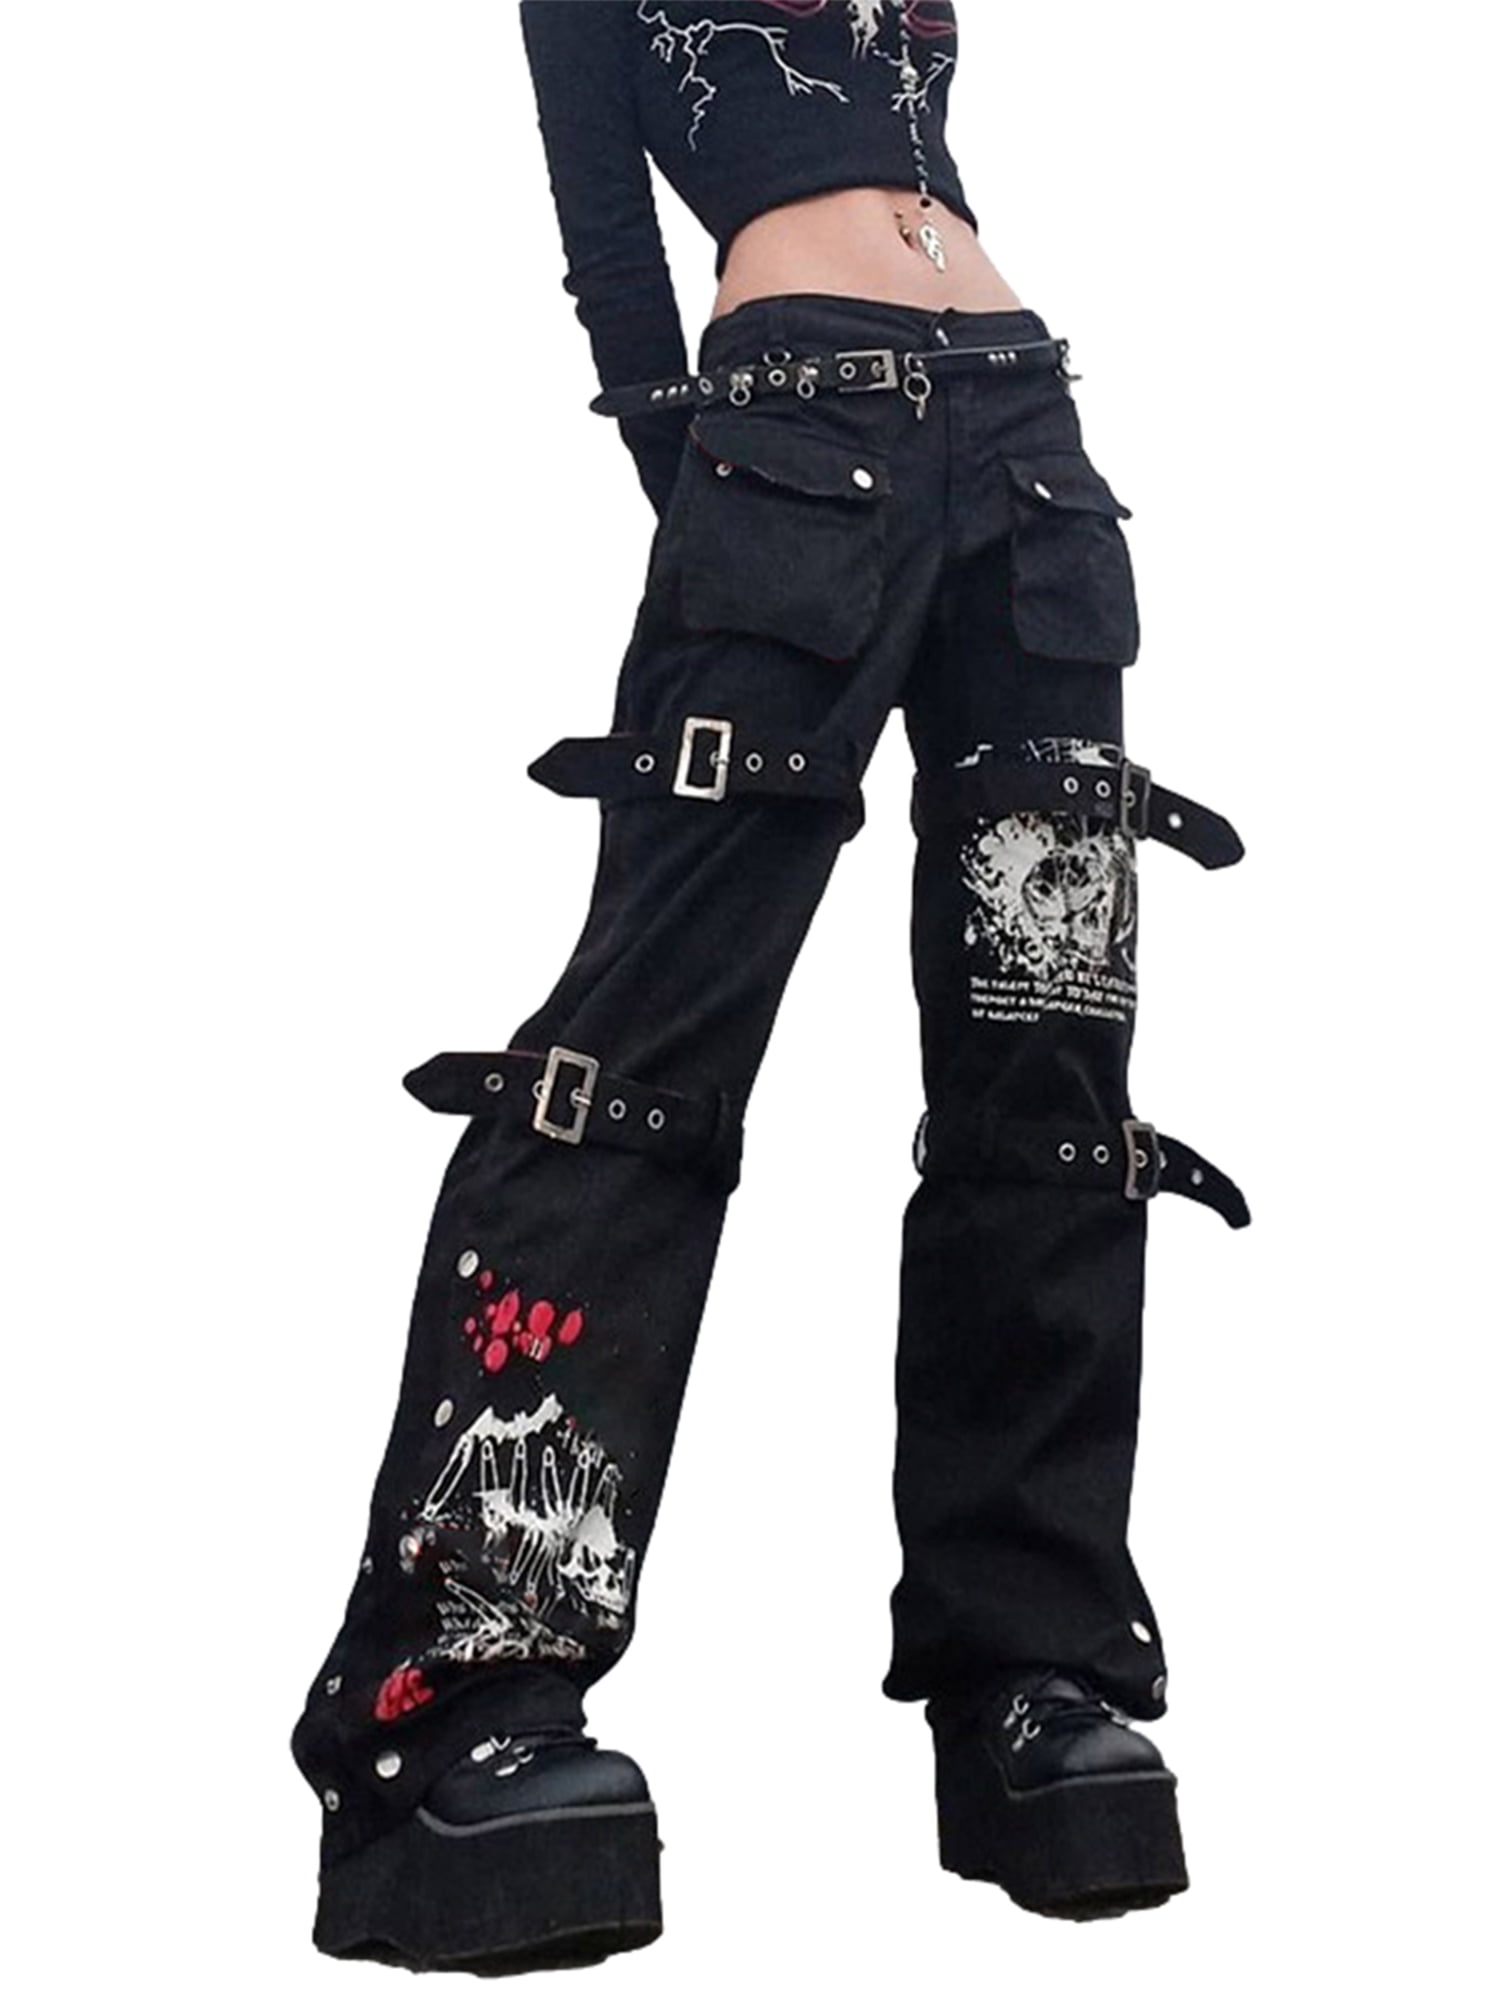 Beseve Women Goth Sweatpants Y2K Rhinestone Harem Pants High Waisted Baggy Pants 90s Jogger Hippie Grunge Clothes Streetwear